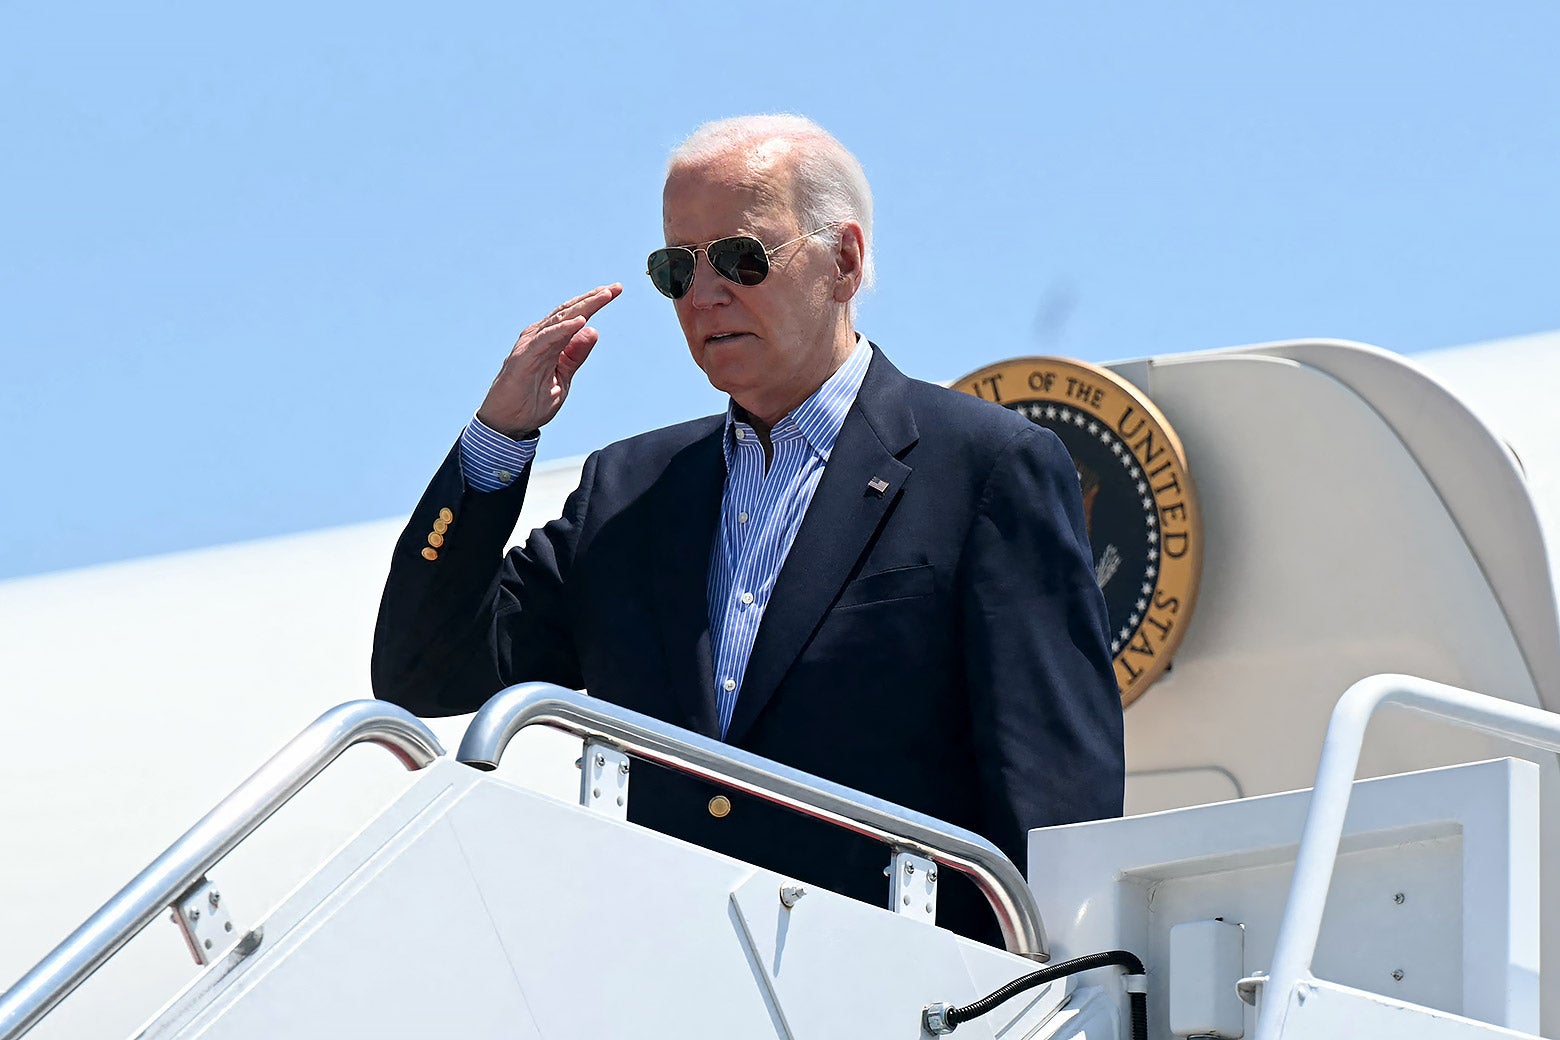 The One Event That Sheds Light on What Will Happen With Biden